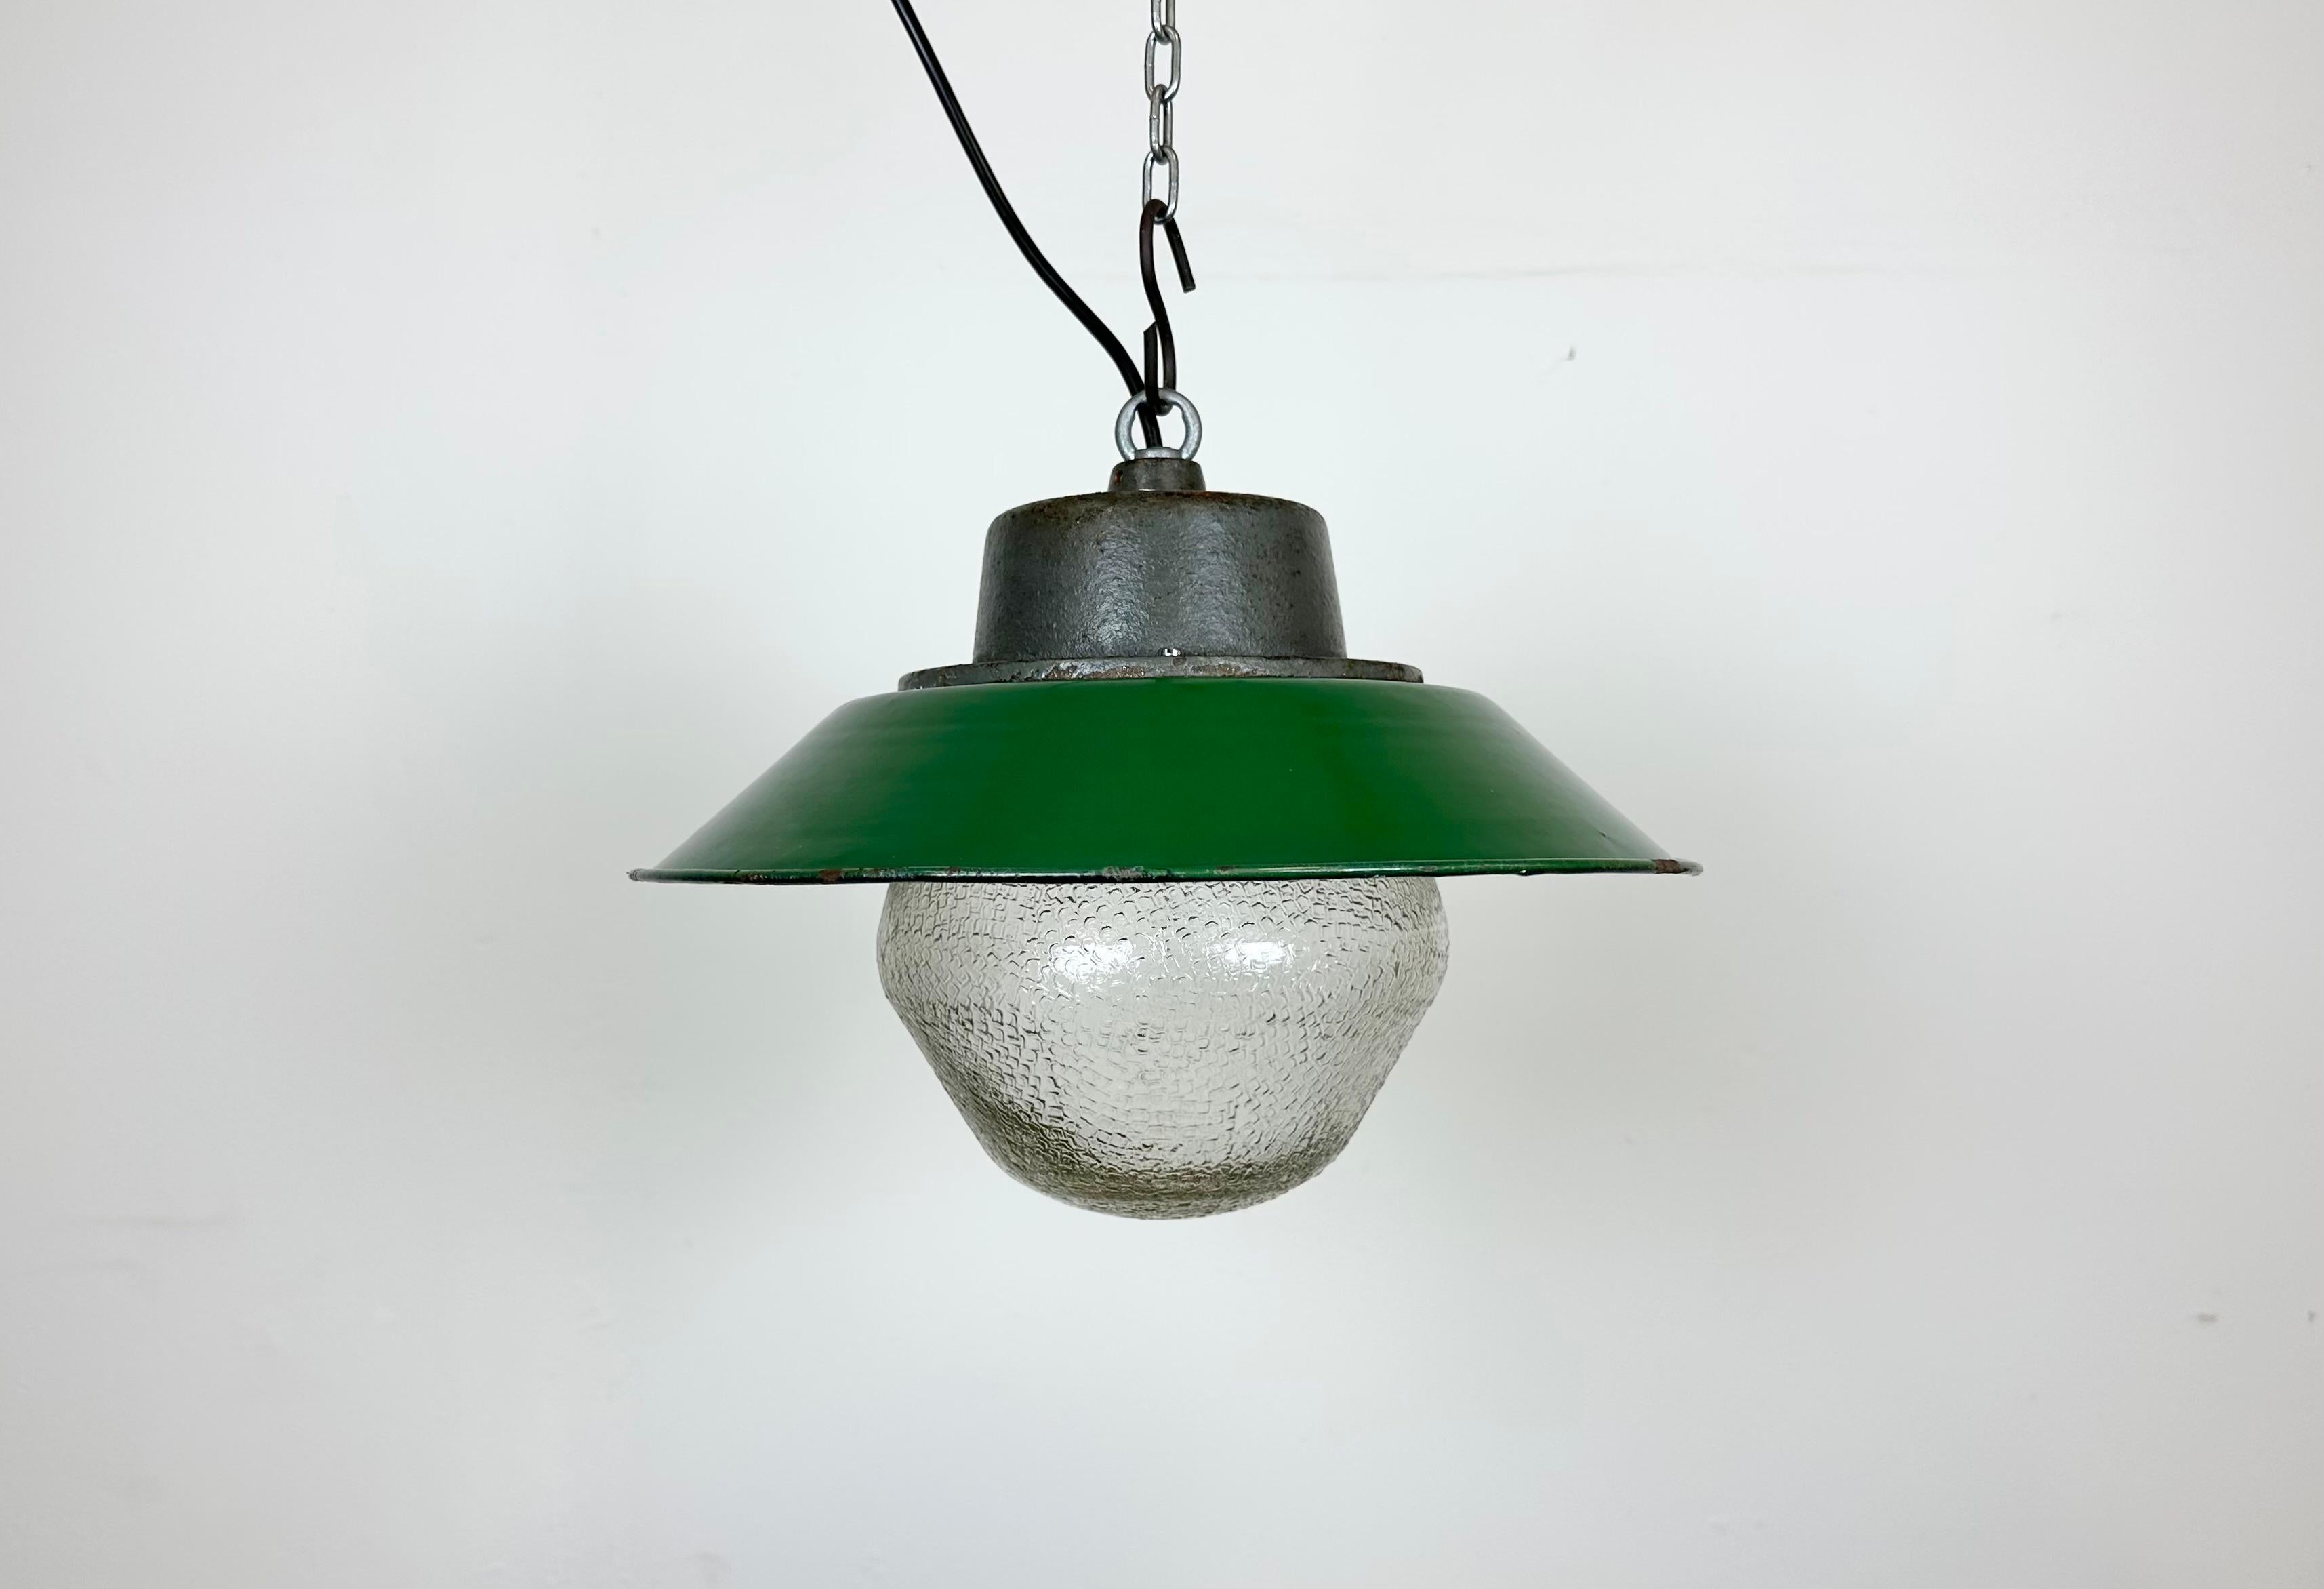 Hanging lamp manufactured by Przyslosc Sosnowiec in Poland during the 1960s. It features a green enamel shade with a white enamel interior, a cast iron top, and a frosted glass cover. The porcelain socket requires E 27/ E26 lightbulbs. New wire. The